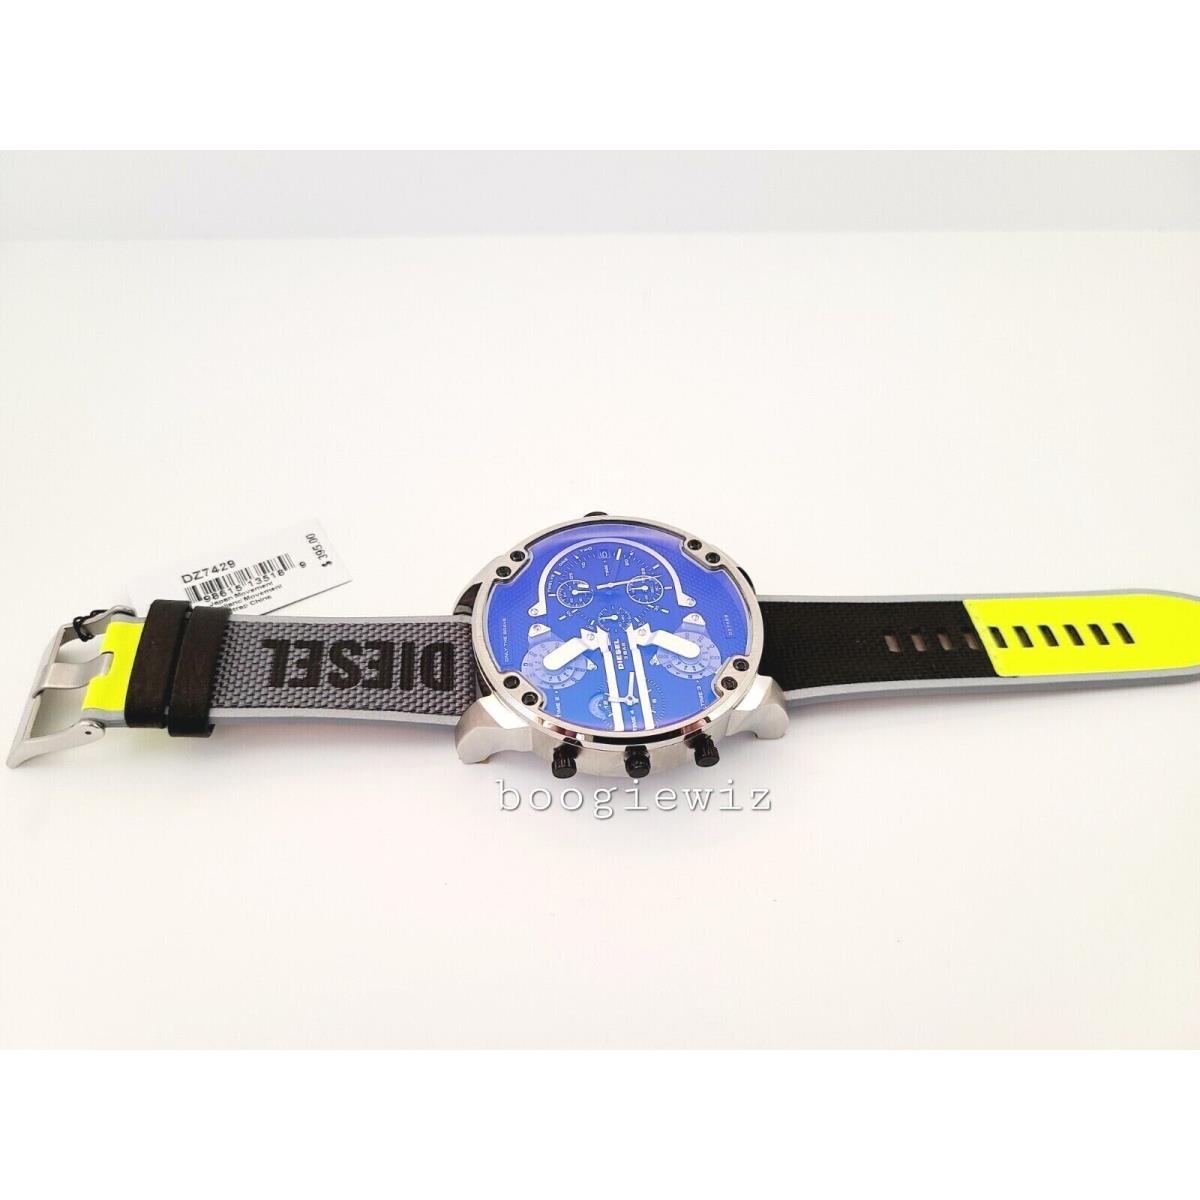 Diesel watch Daddy - Multi color crystal, iridescent blue and yellows Dial, has accent lime color on back, see photo Band, Black and stainless Bezel 3